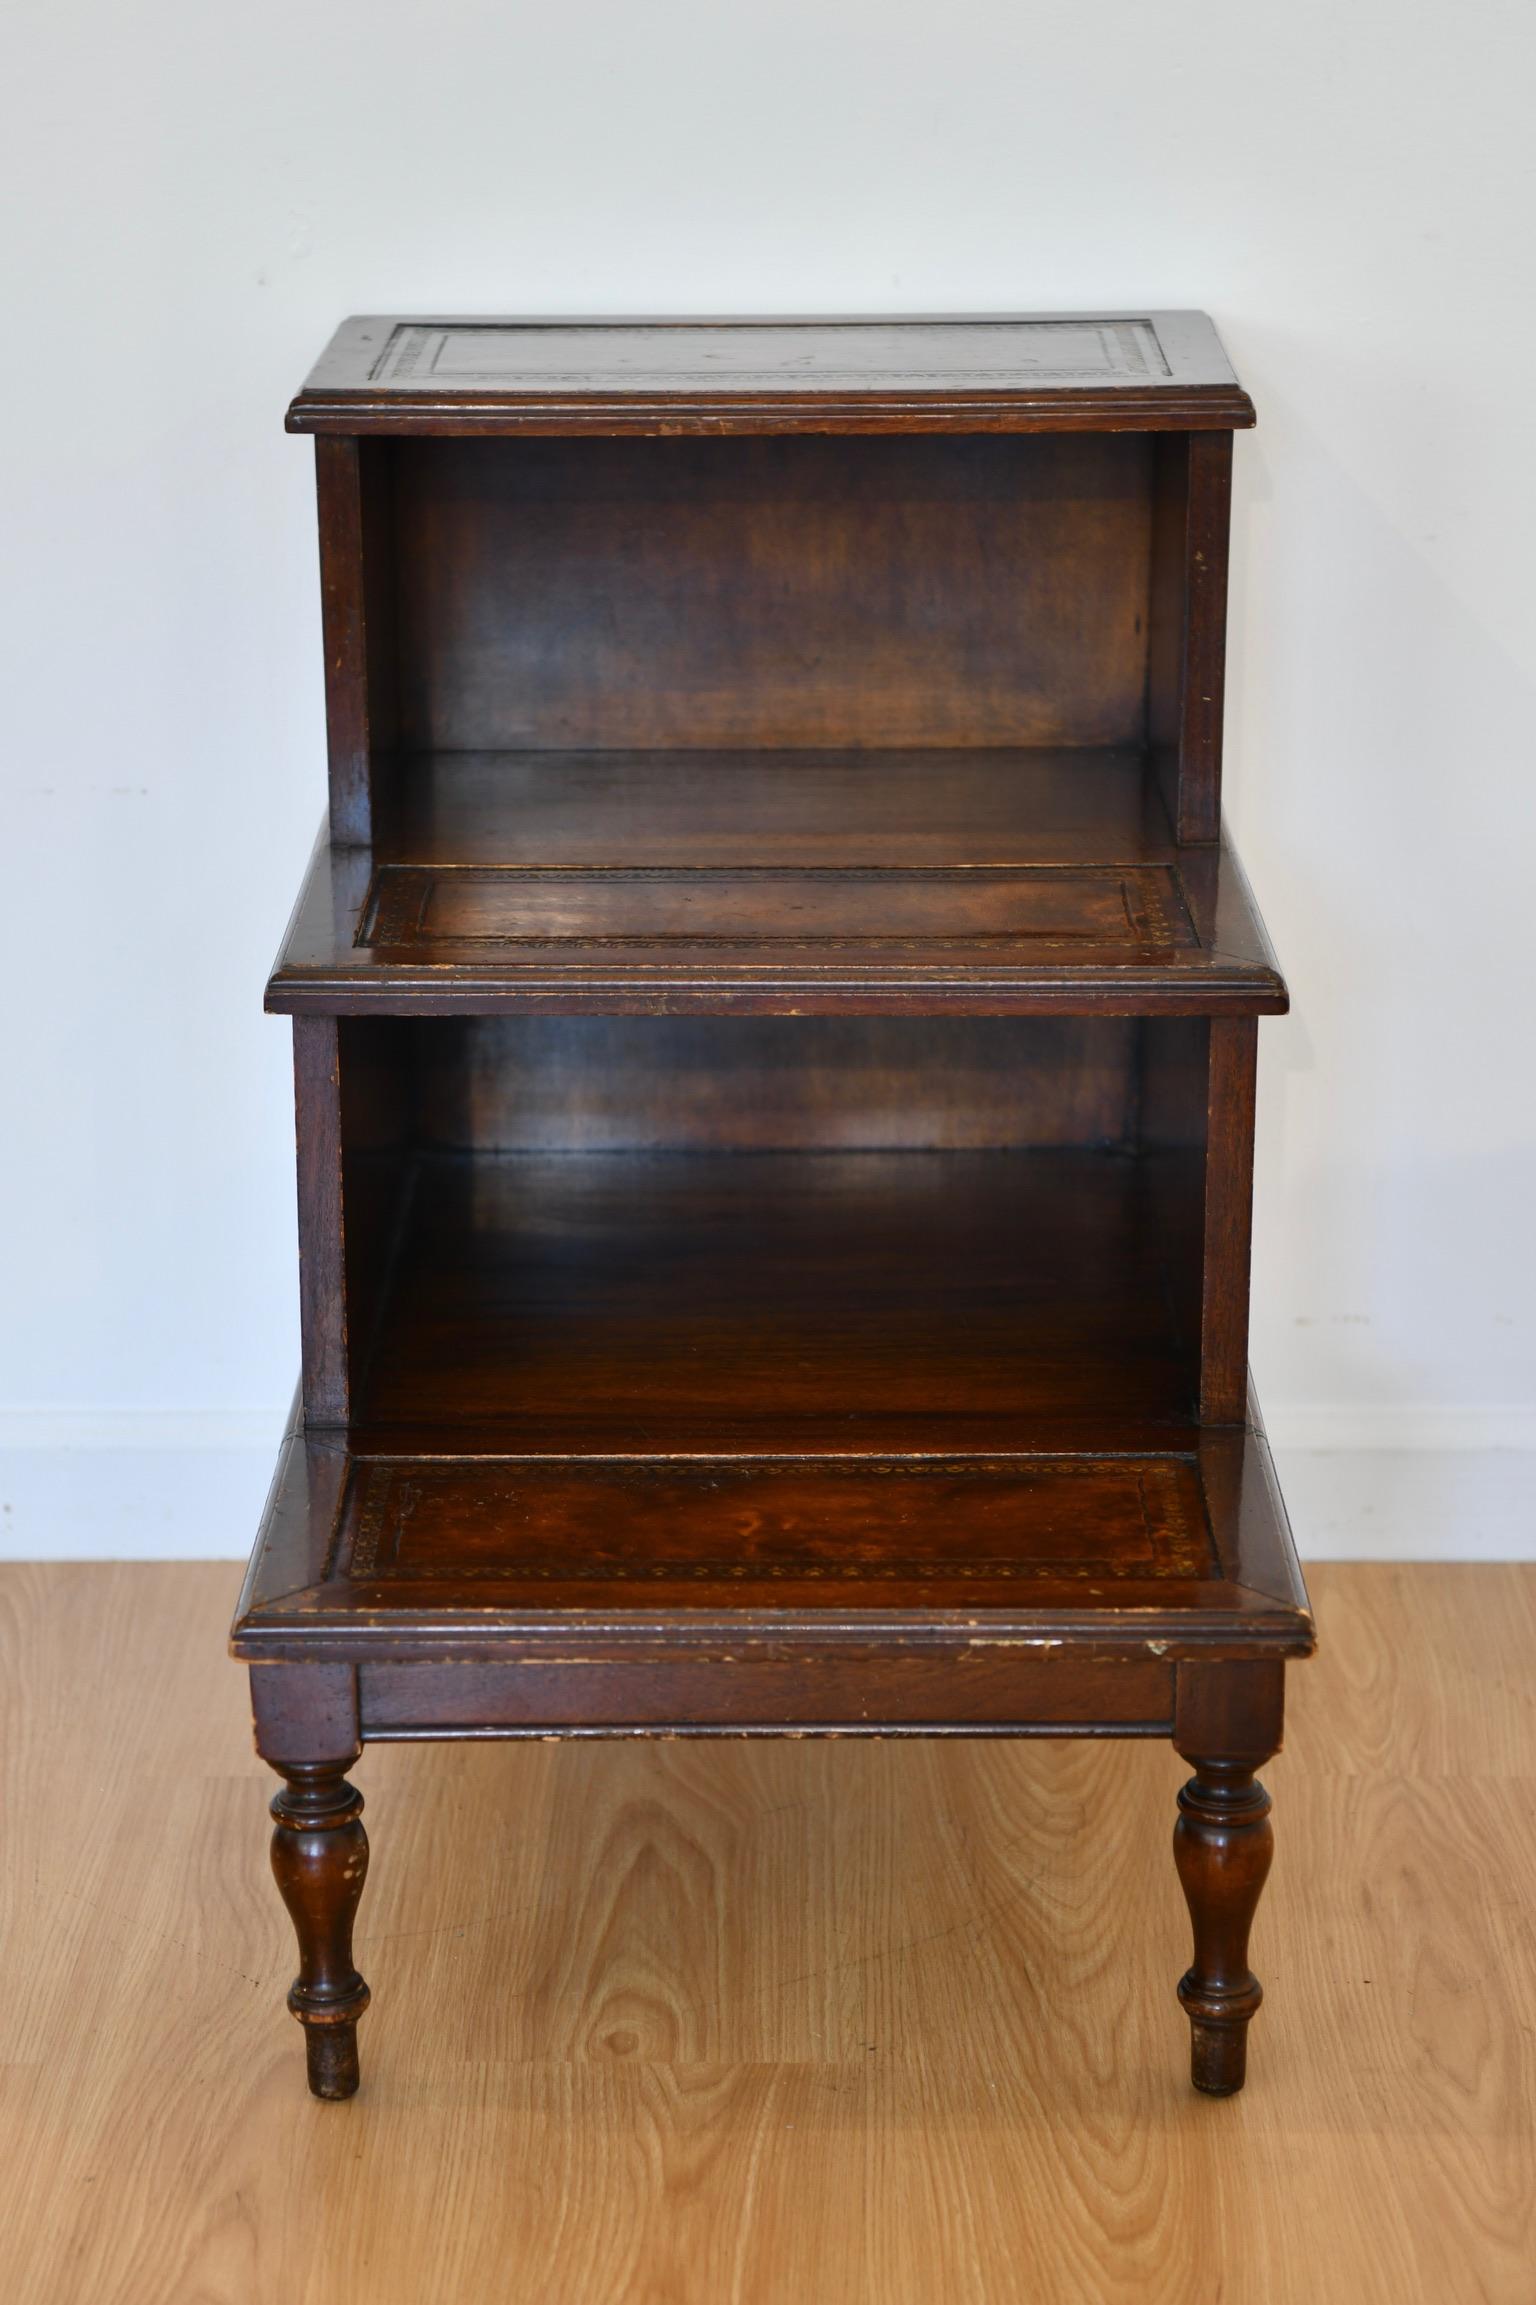 Georgian-style mahogany step table with inset tops and turned feet. Dimensions: 27